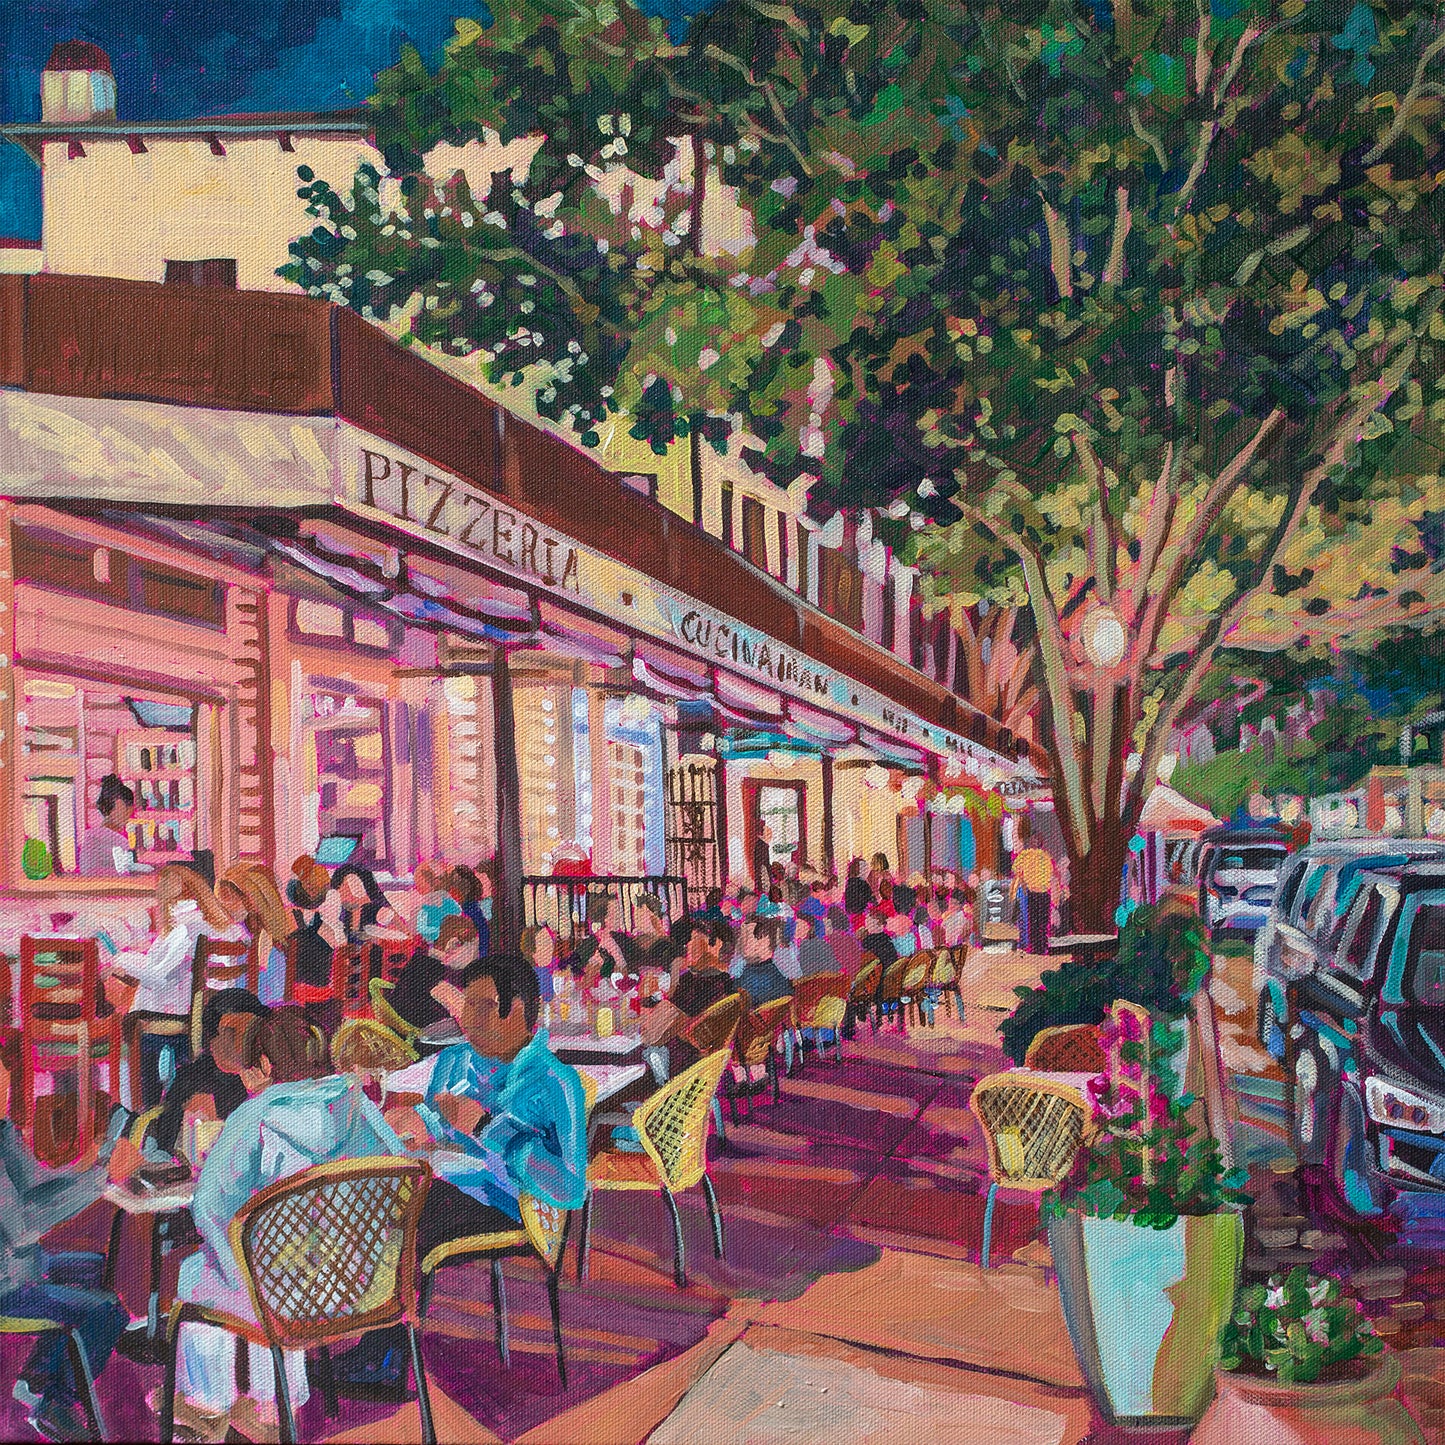 Winter Park Nightlife 7 painting 20x20 inches vibrant street scene outdoor cafe at night